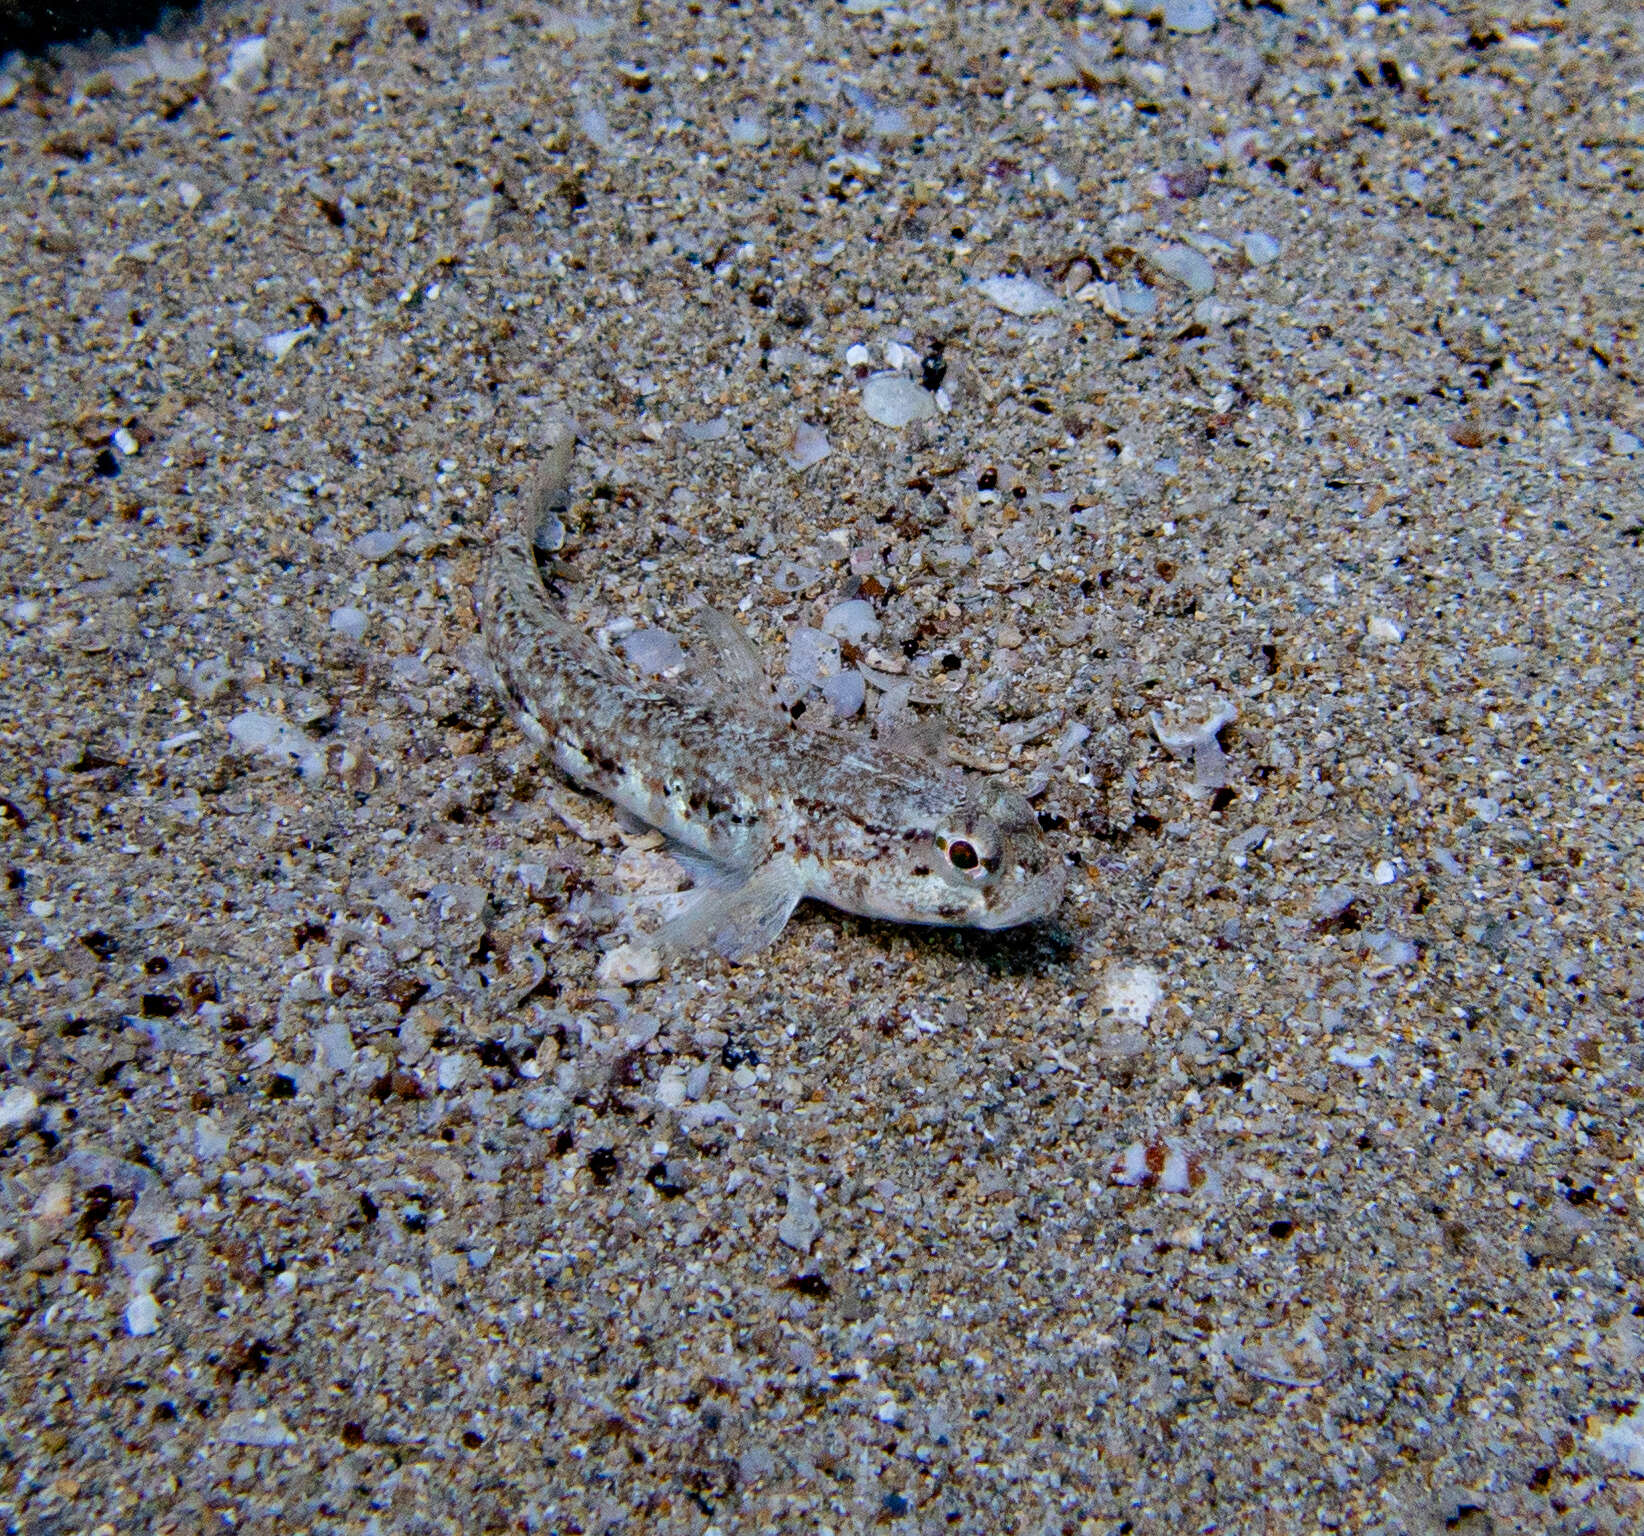 Image of Roule's Goby